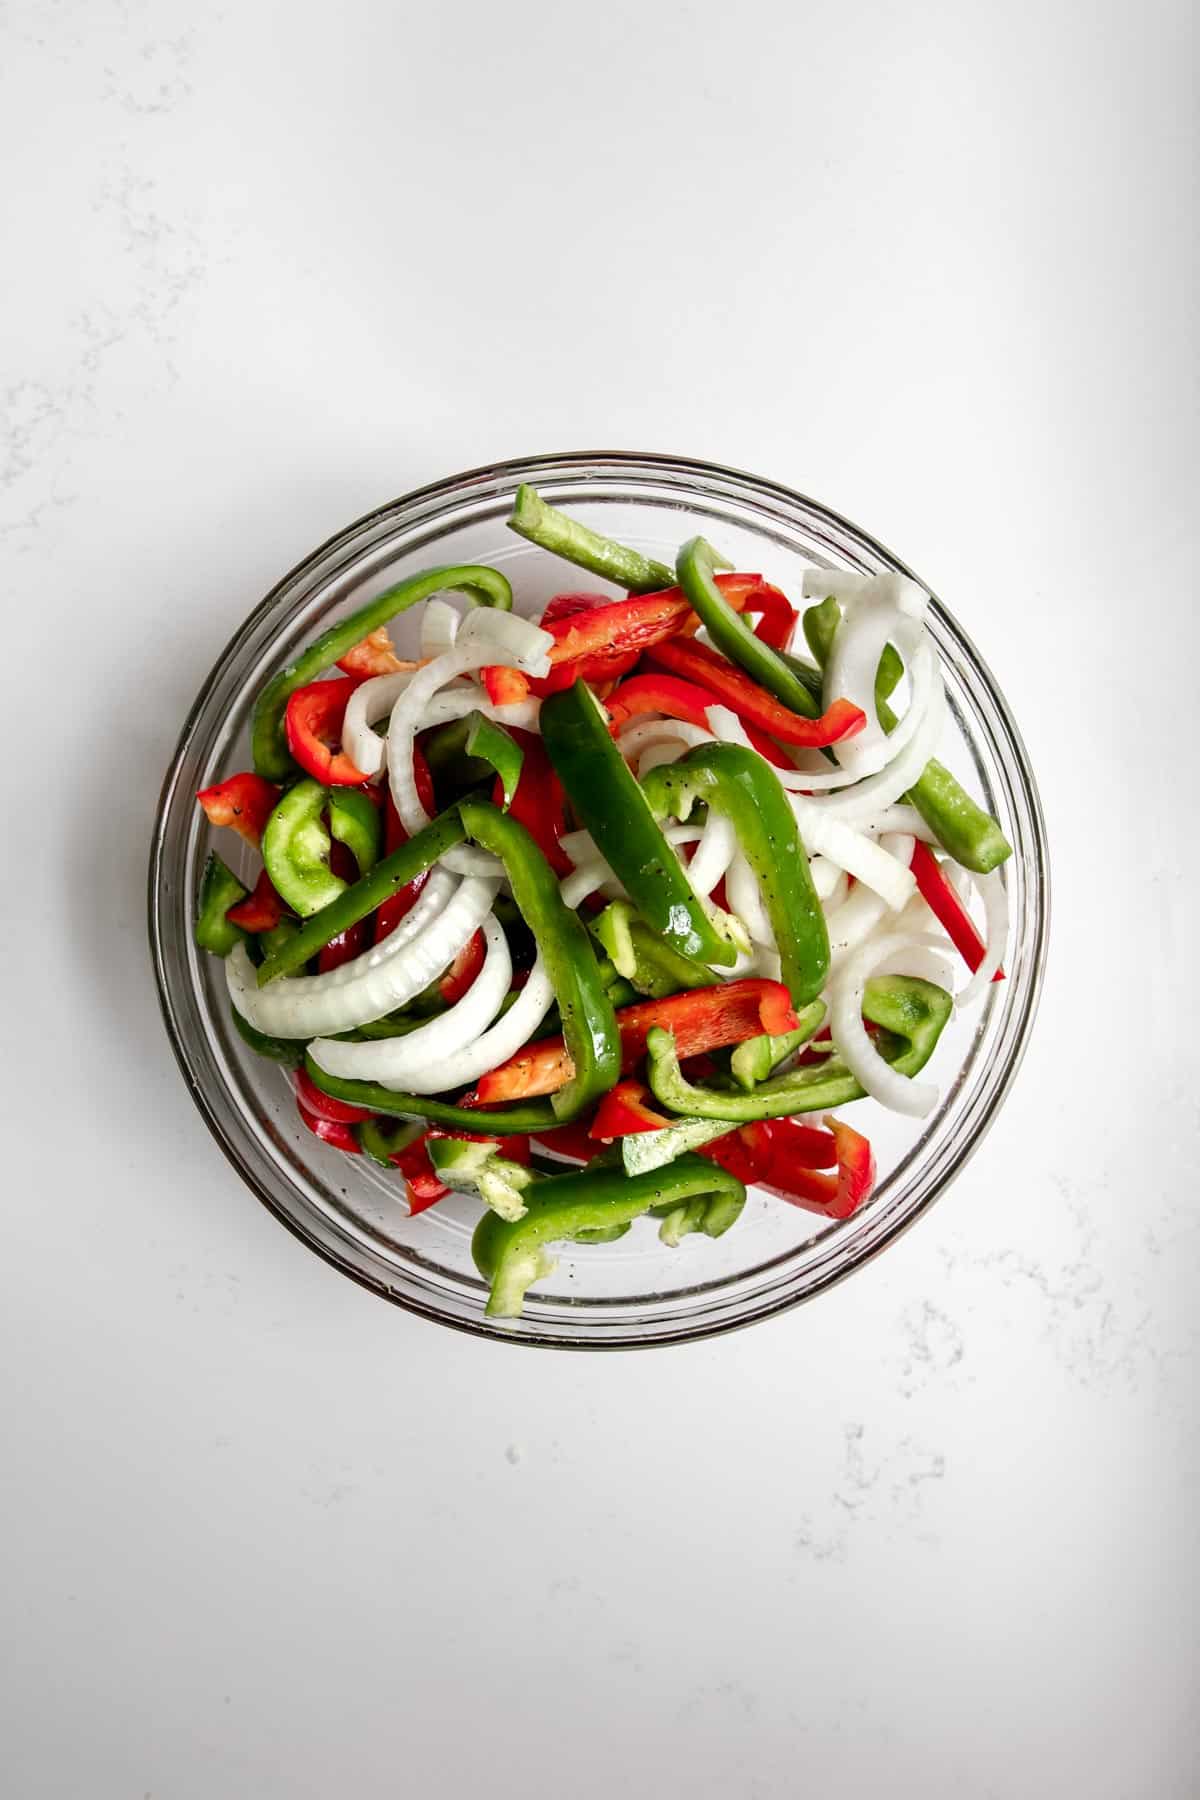 Sliced green peppers, red peppers, and onions, tossed with oil, salt, and pepper, in a glass bowl on white marble background.